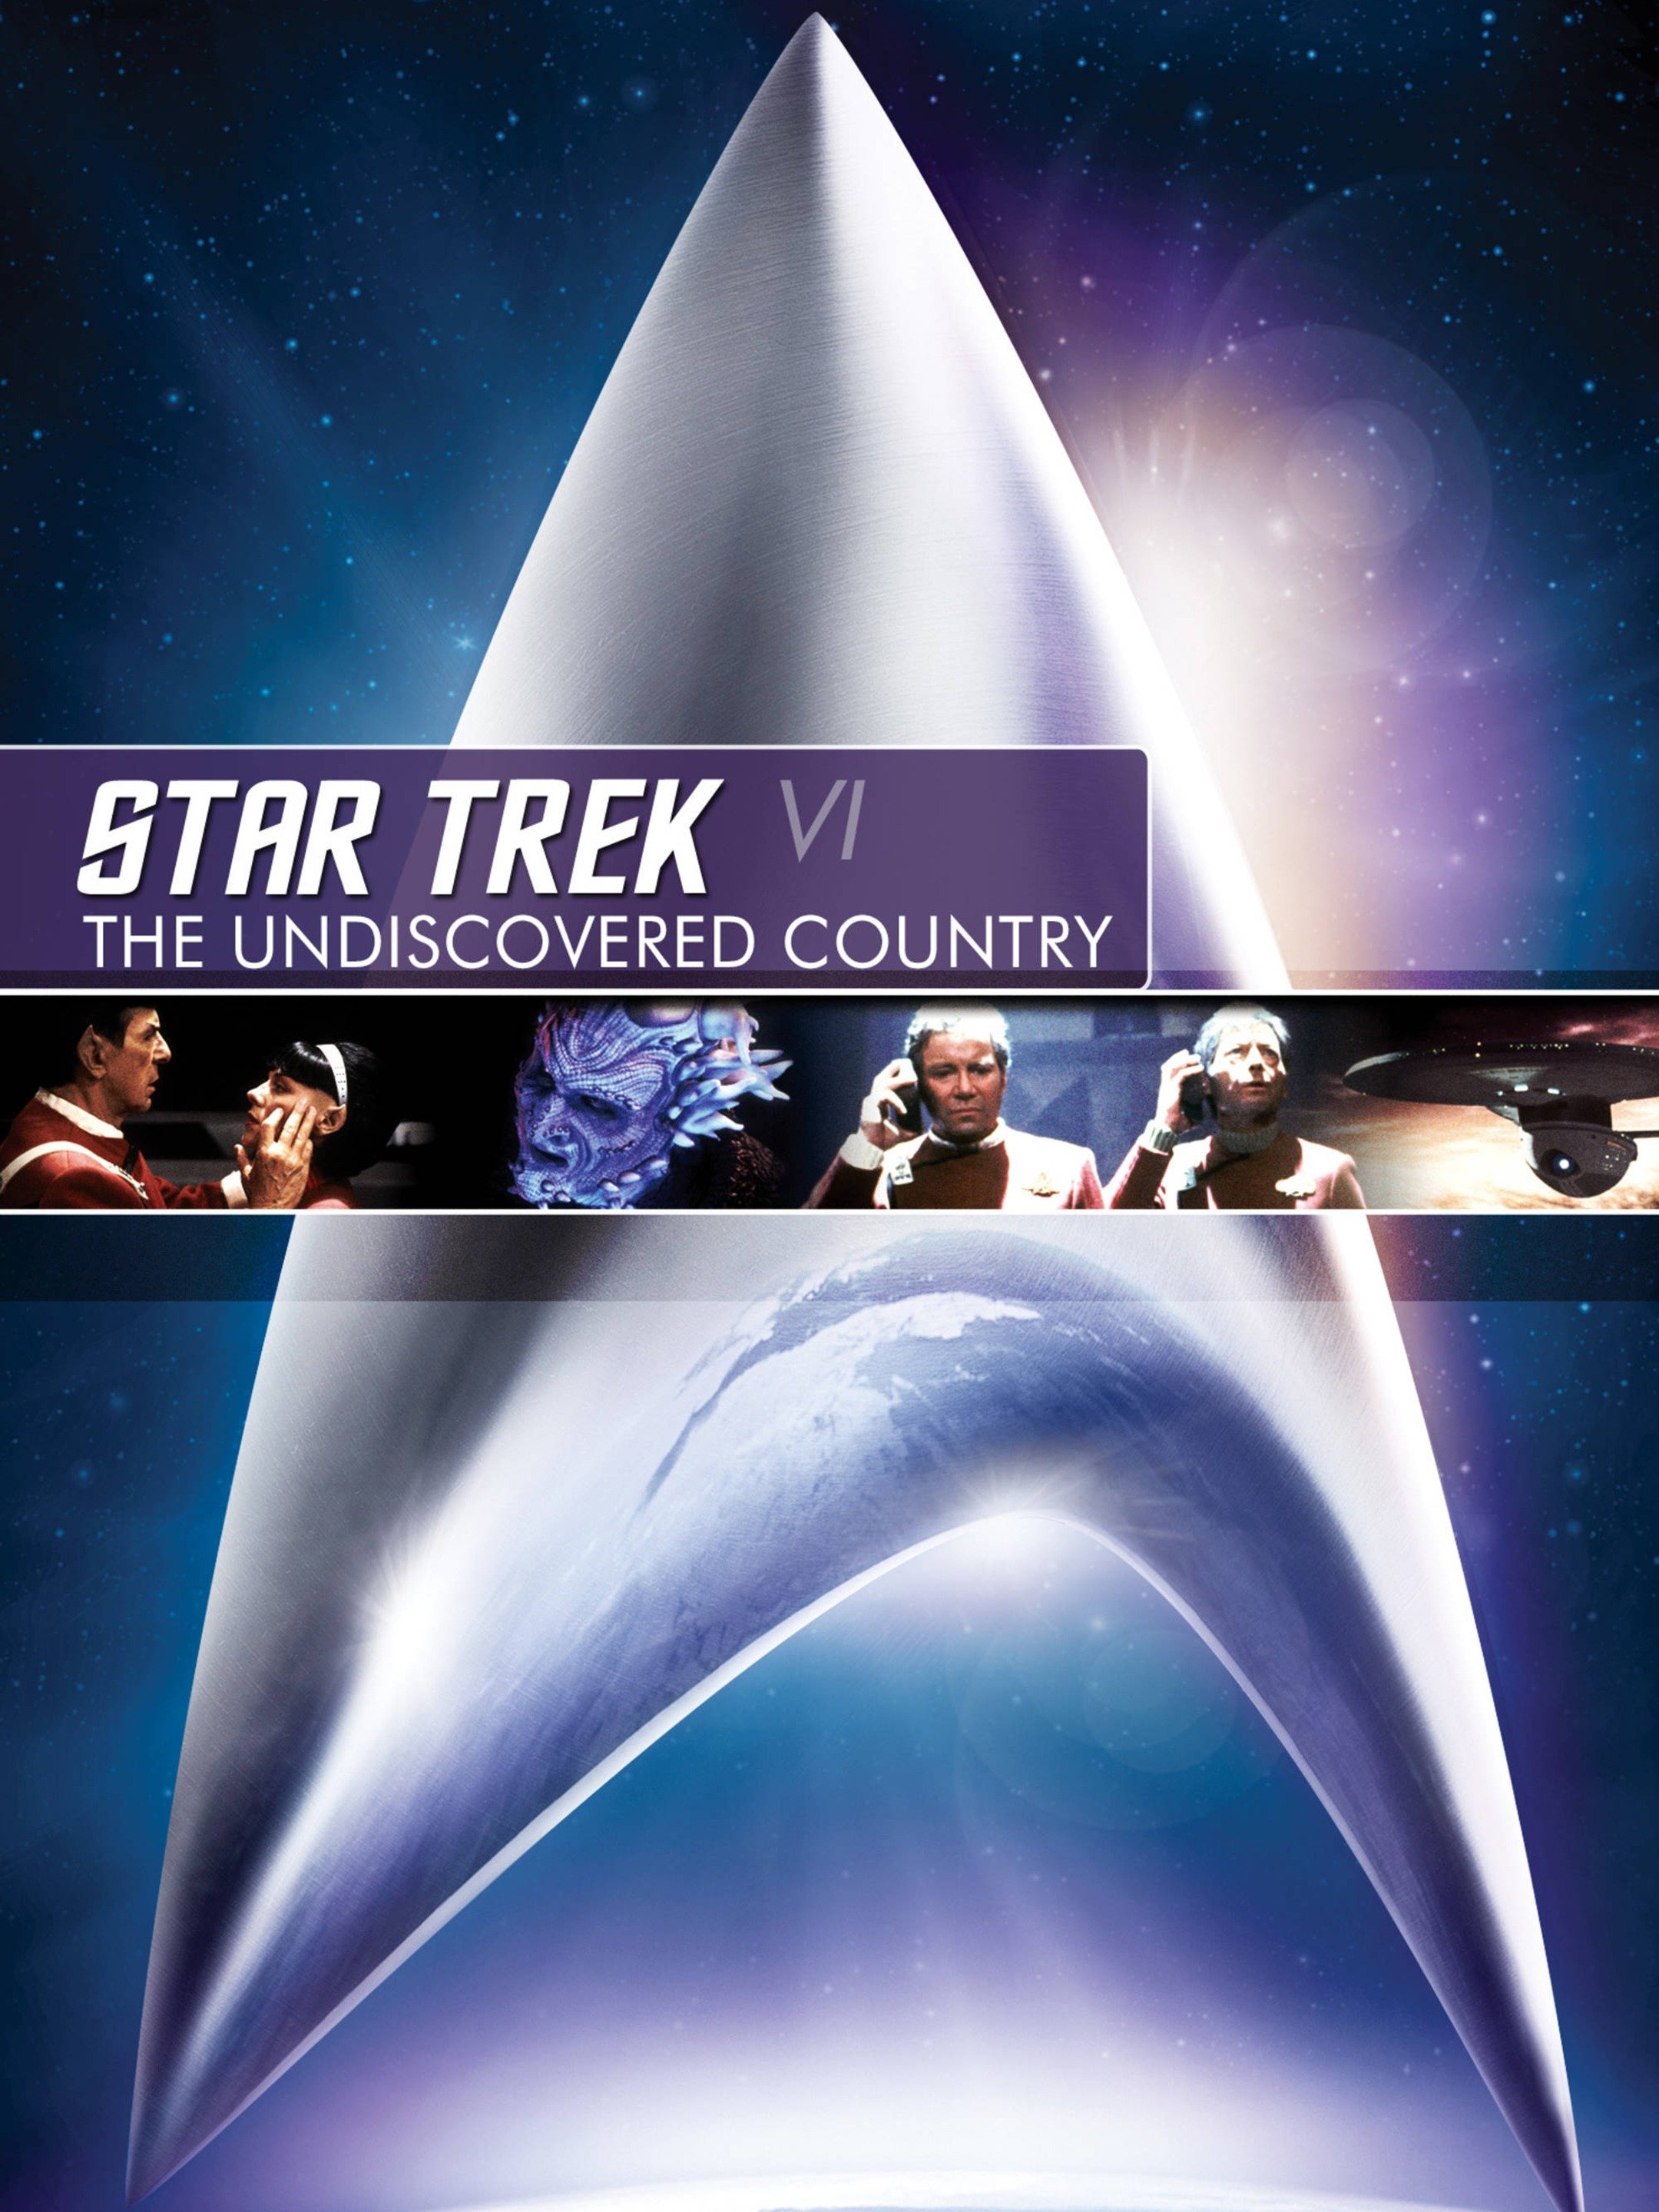 star trek vi the undiscovered country release date